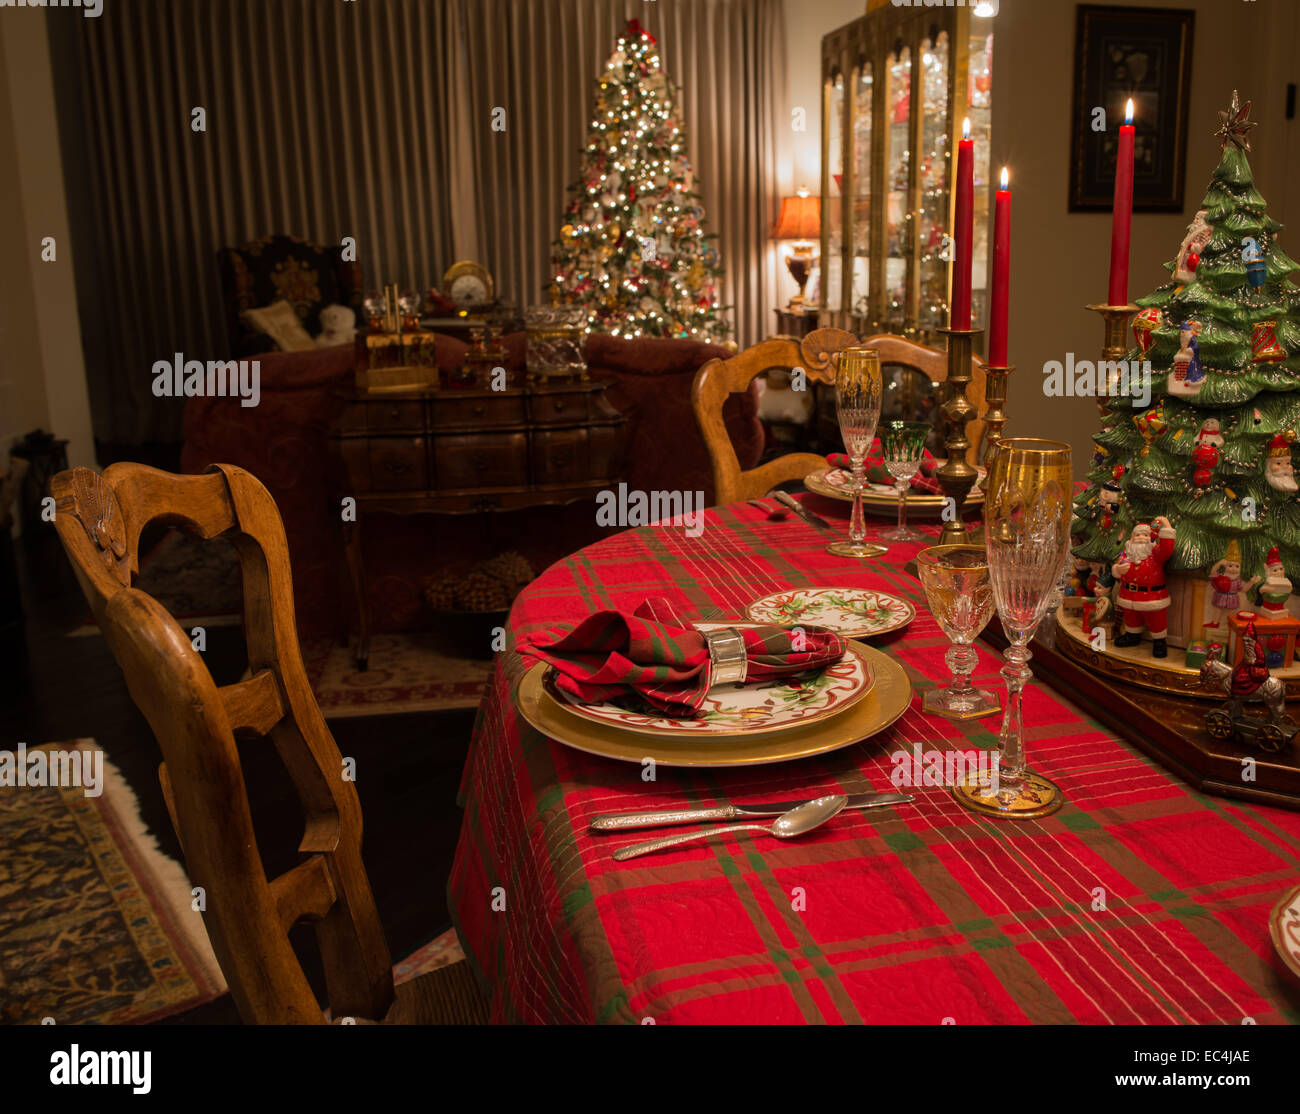 Set Christmas dinner table with Christmas tree in background Stock Photo